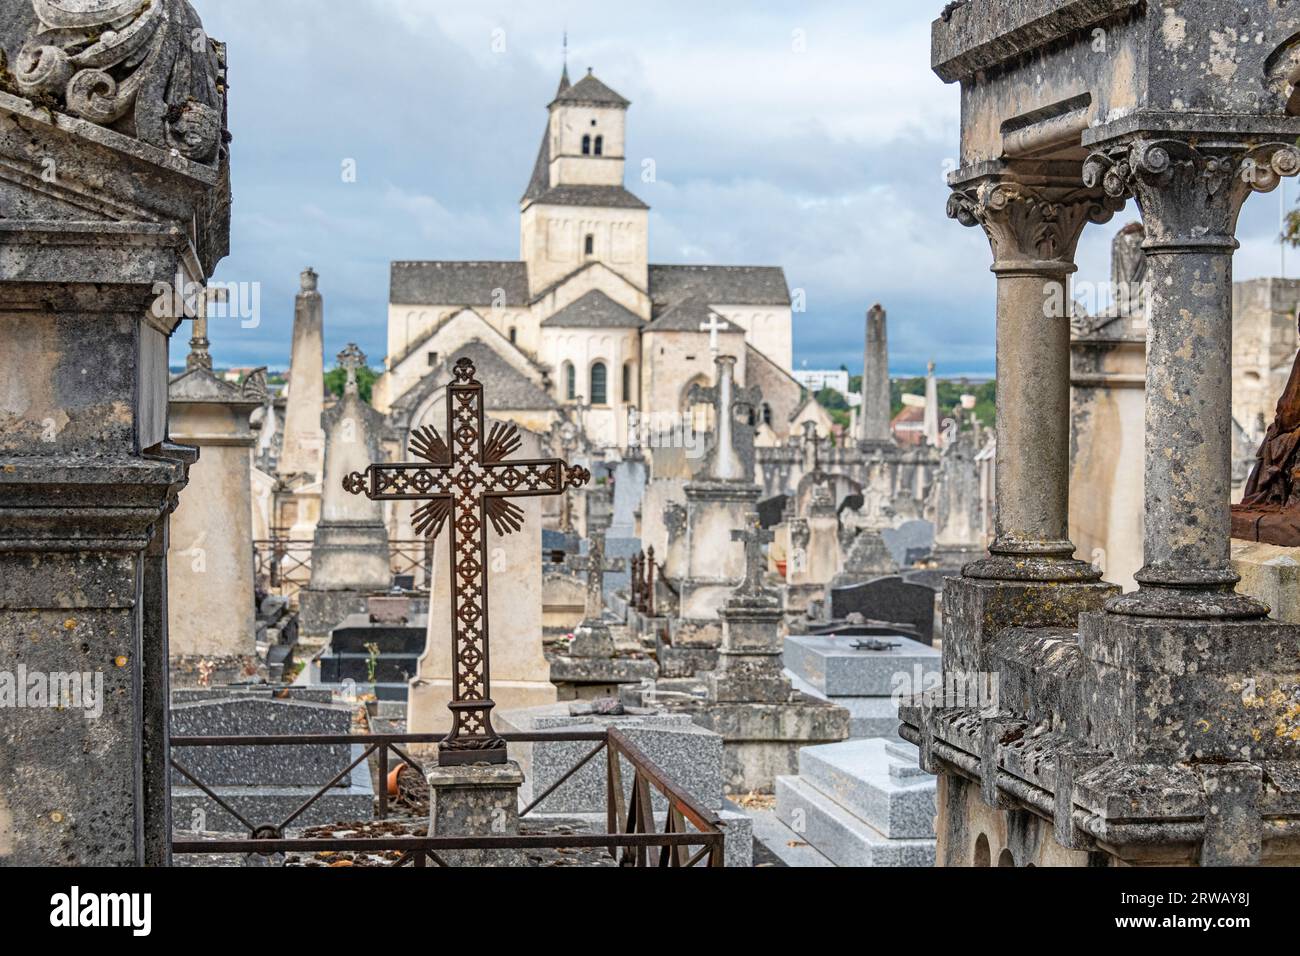 The graveyard of Church Saint-Vorles under stormy skies in Chatillon Sur Seine, Bourgogne-Franche-Comte, France. Stock Photo